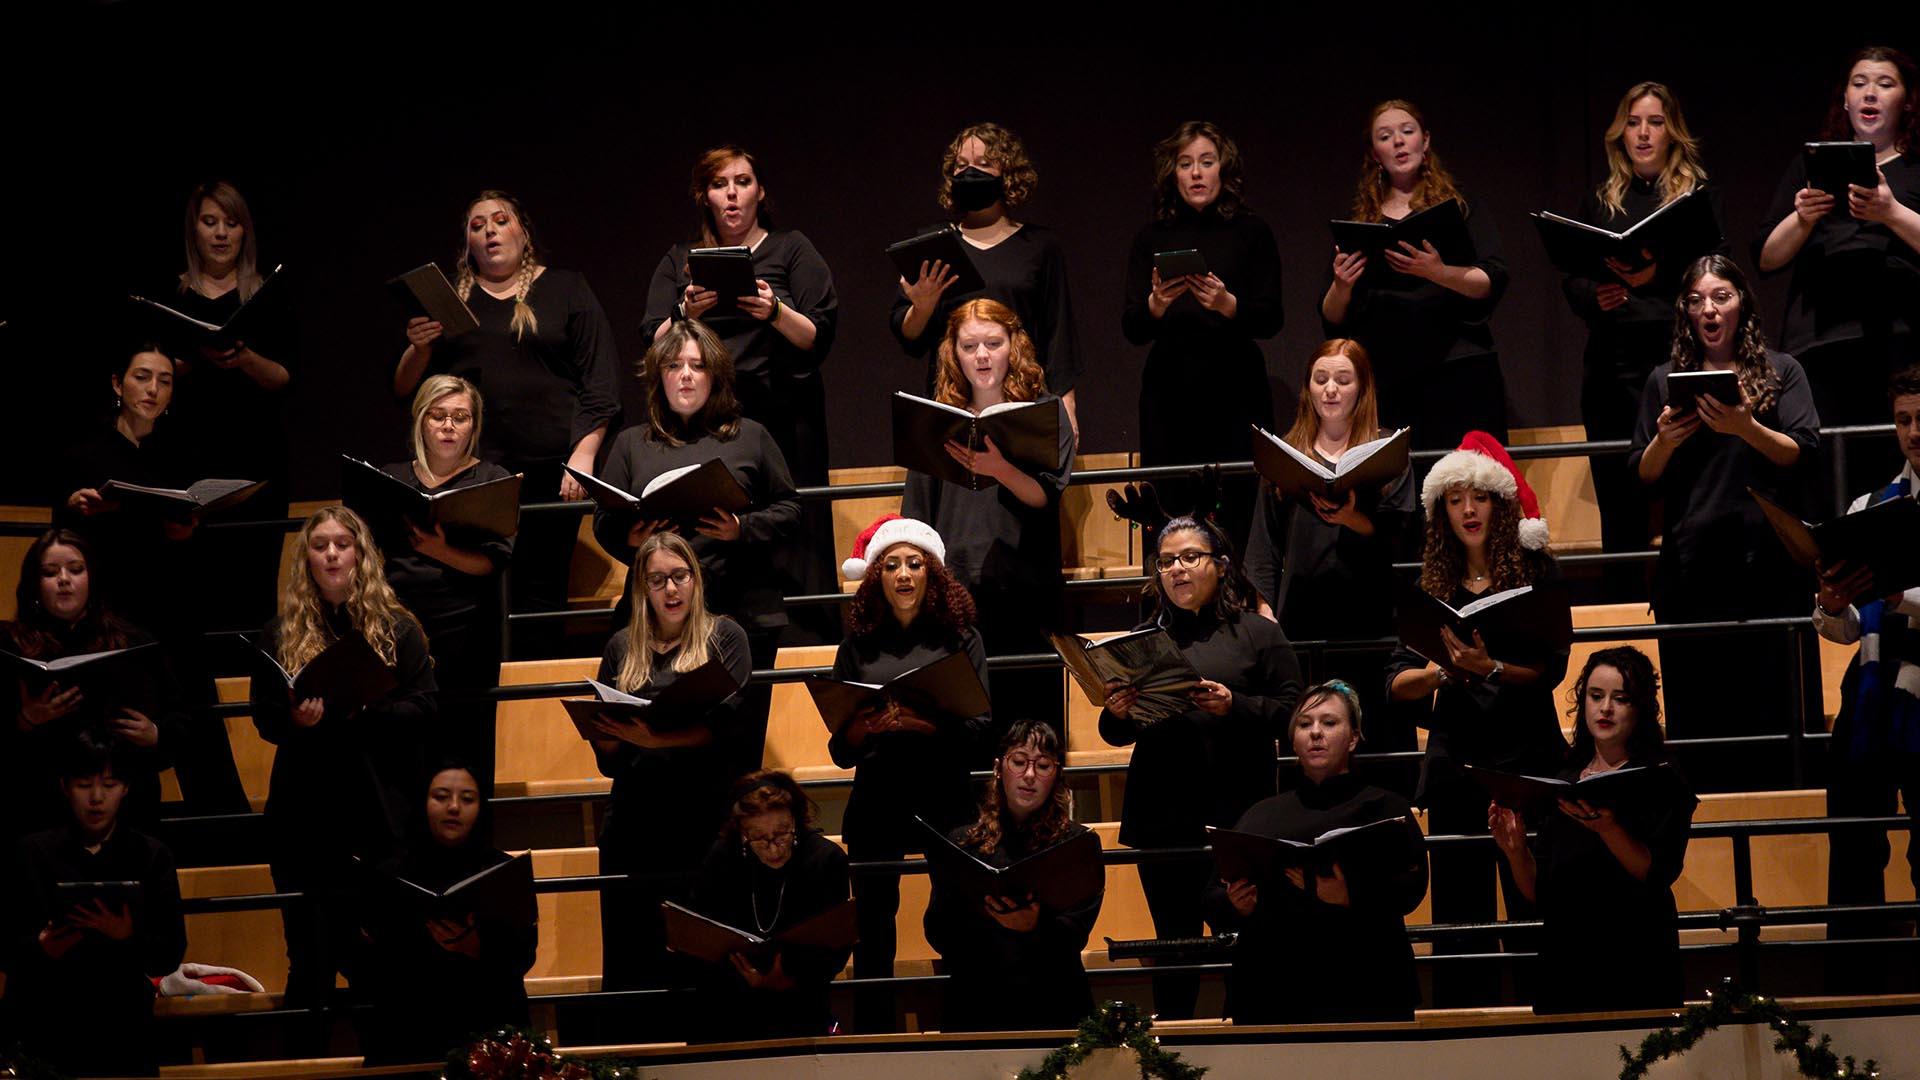 MSU Denver’s ‘Holiday Card to the City’ performance